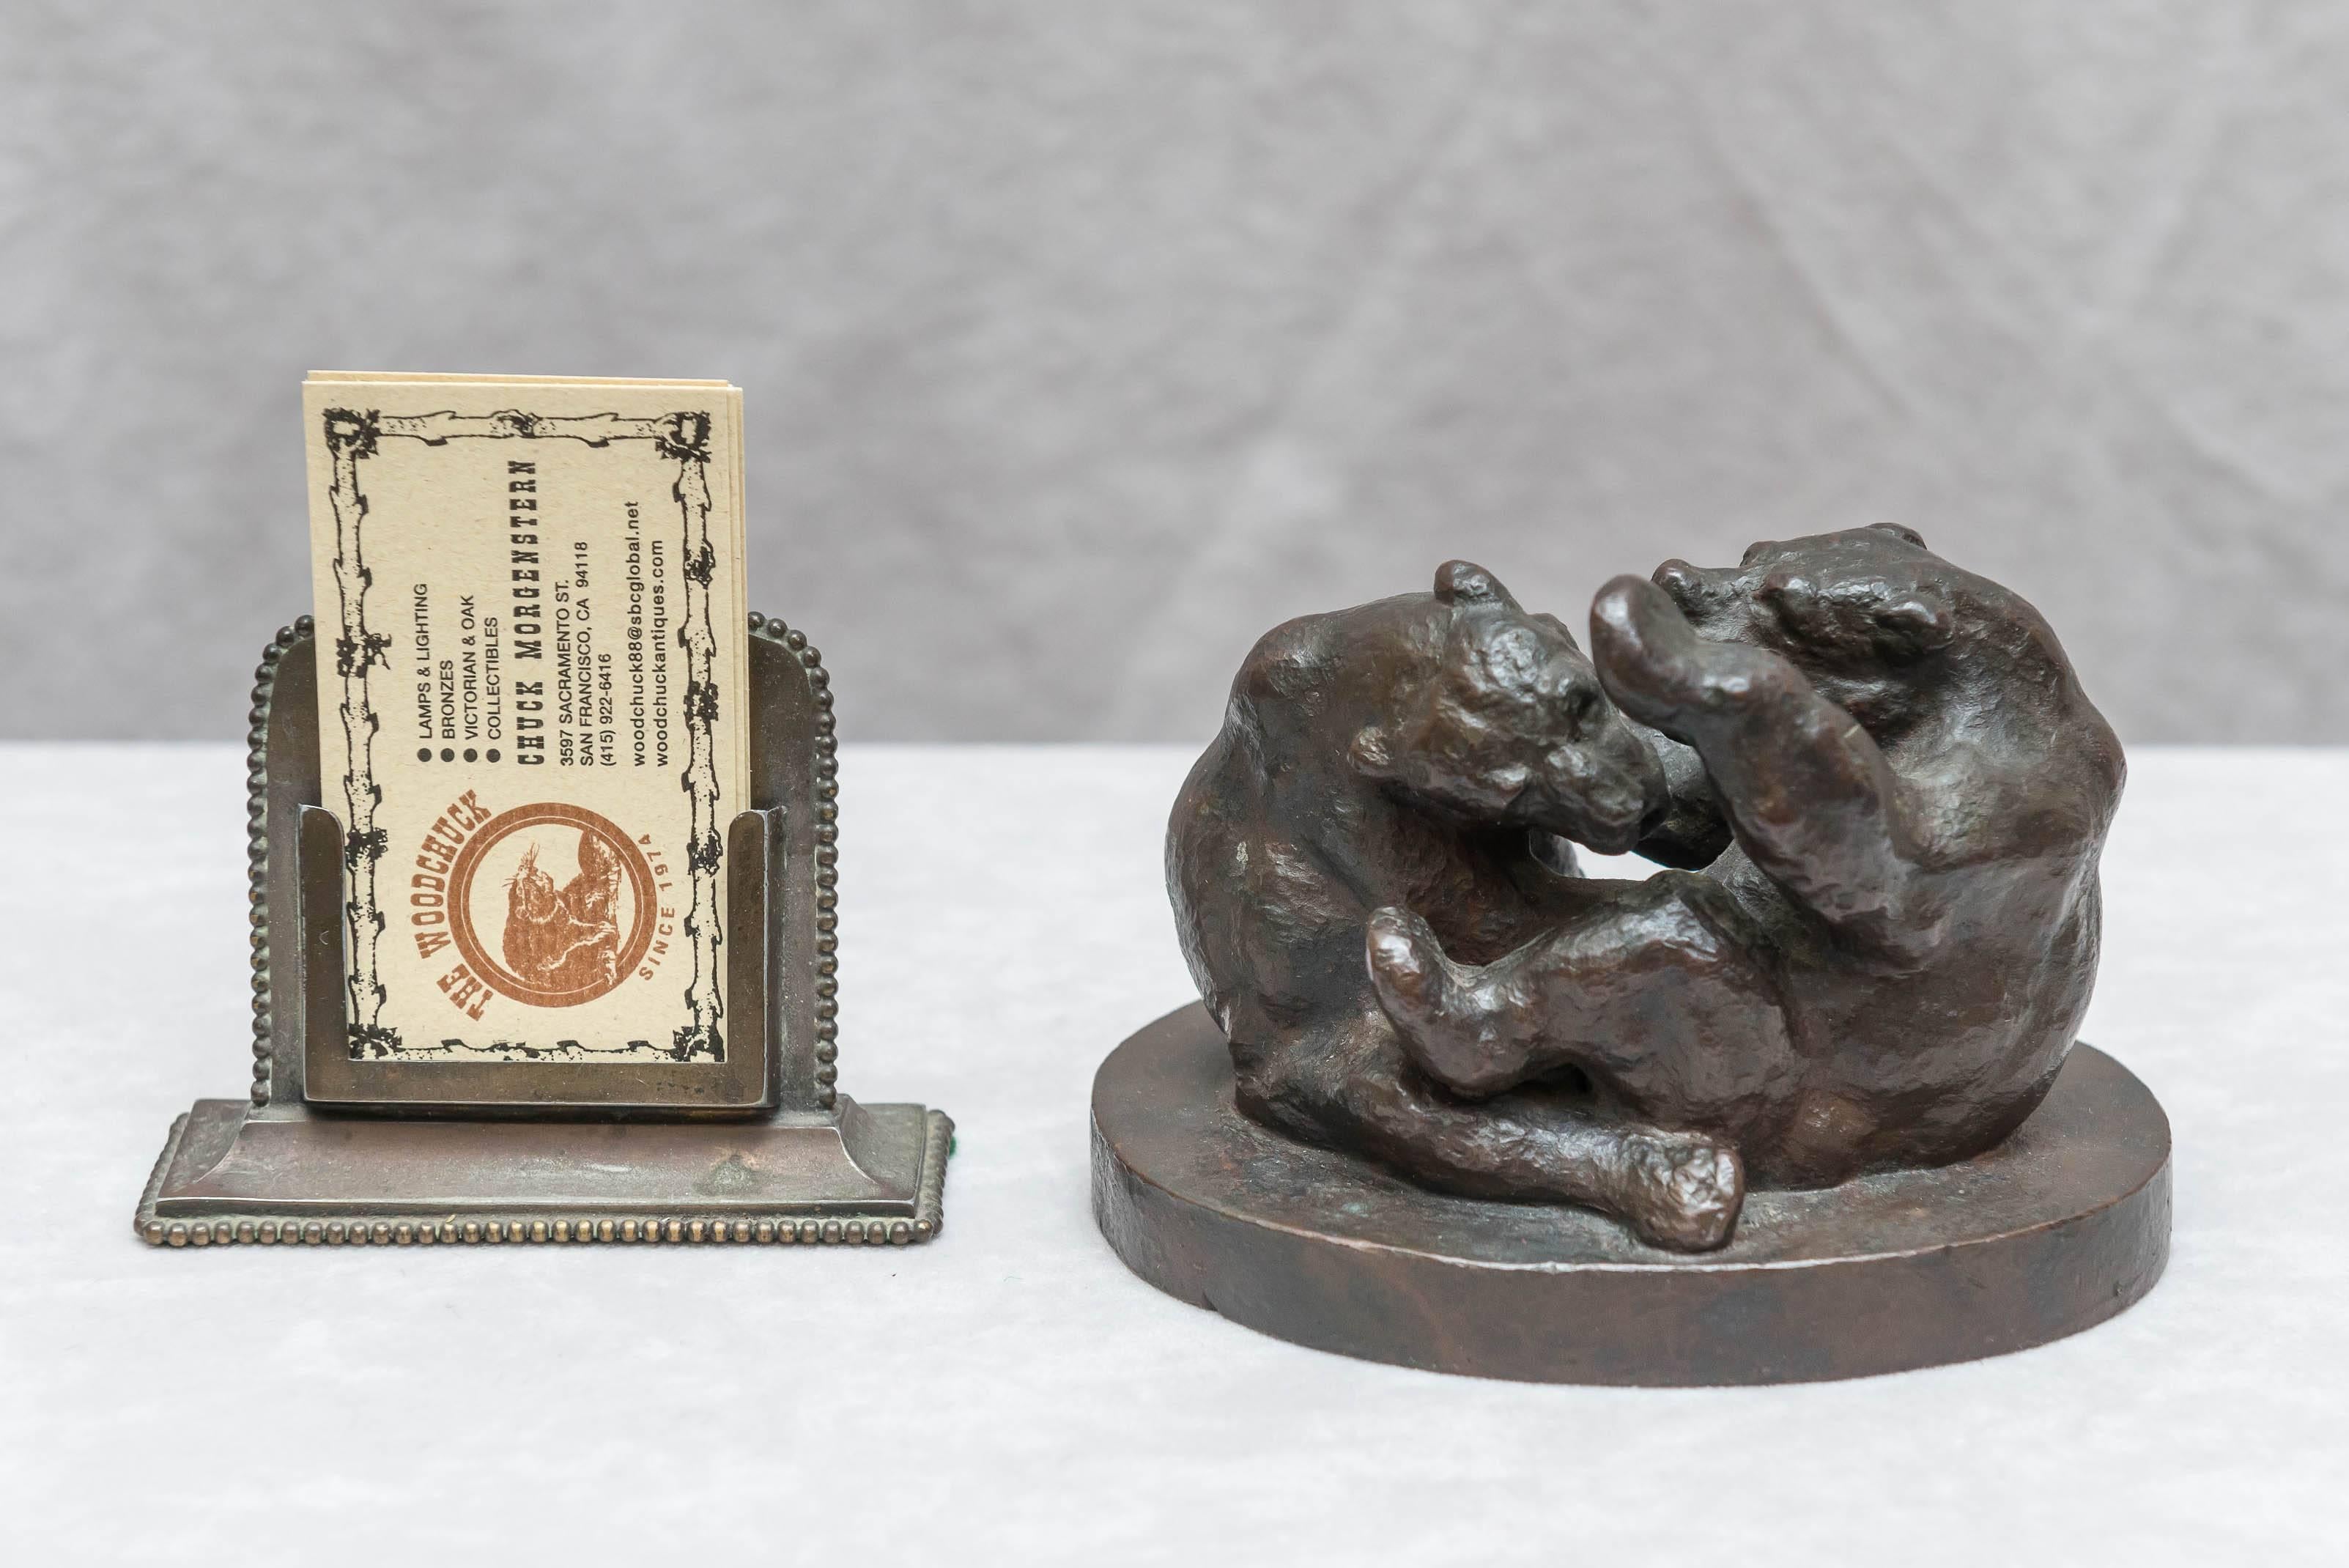 We love bears, and so we could not resist buying these. While unsigned, the bronze does have a monogram that we unfortunately could not decipher. We know this is antique from our over 40 years of selling bronzes, and we believe it is Austrian.